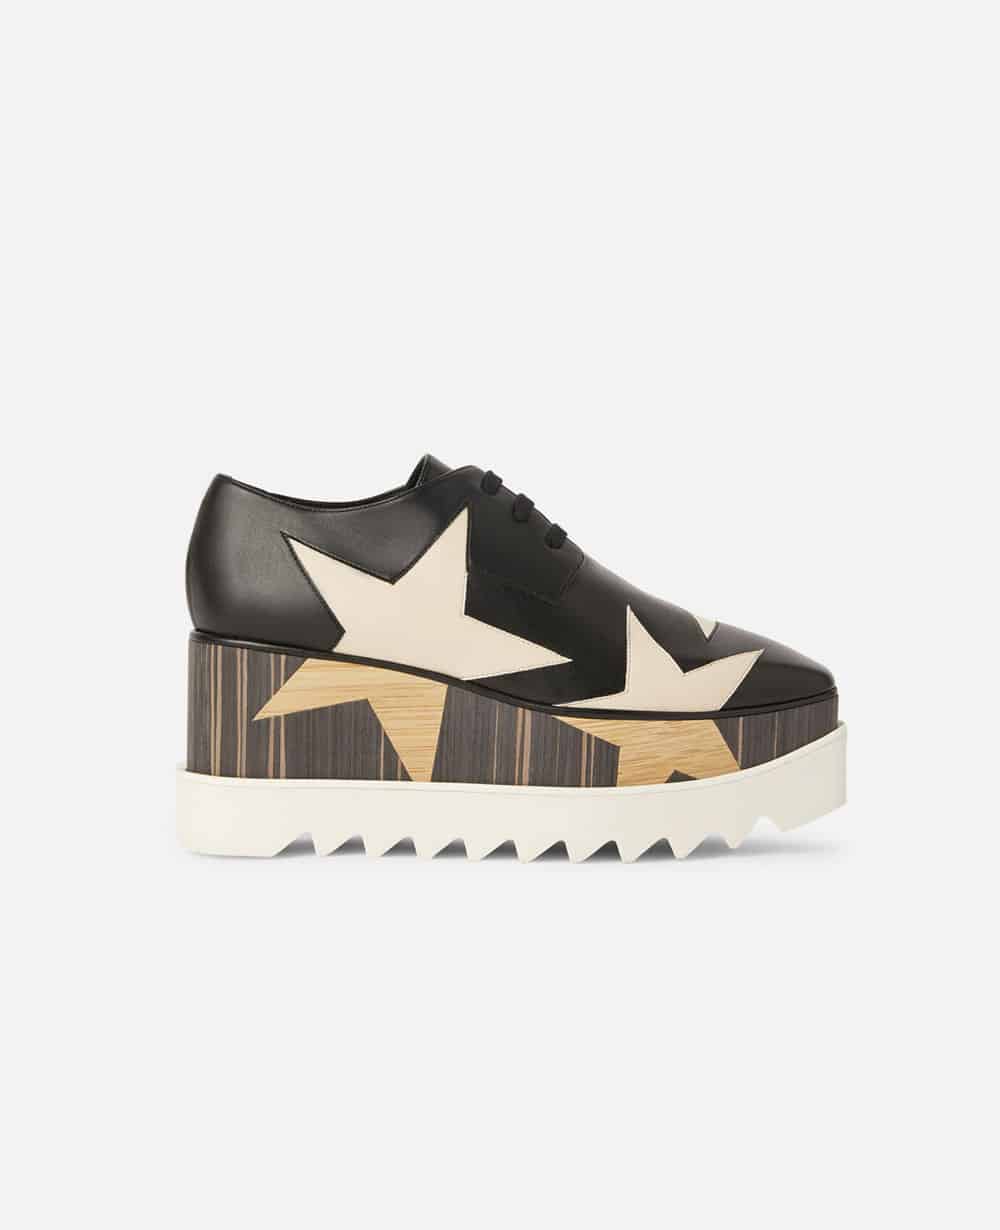 Platform black trainers with star pattern and white soles from Stella McCartney